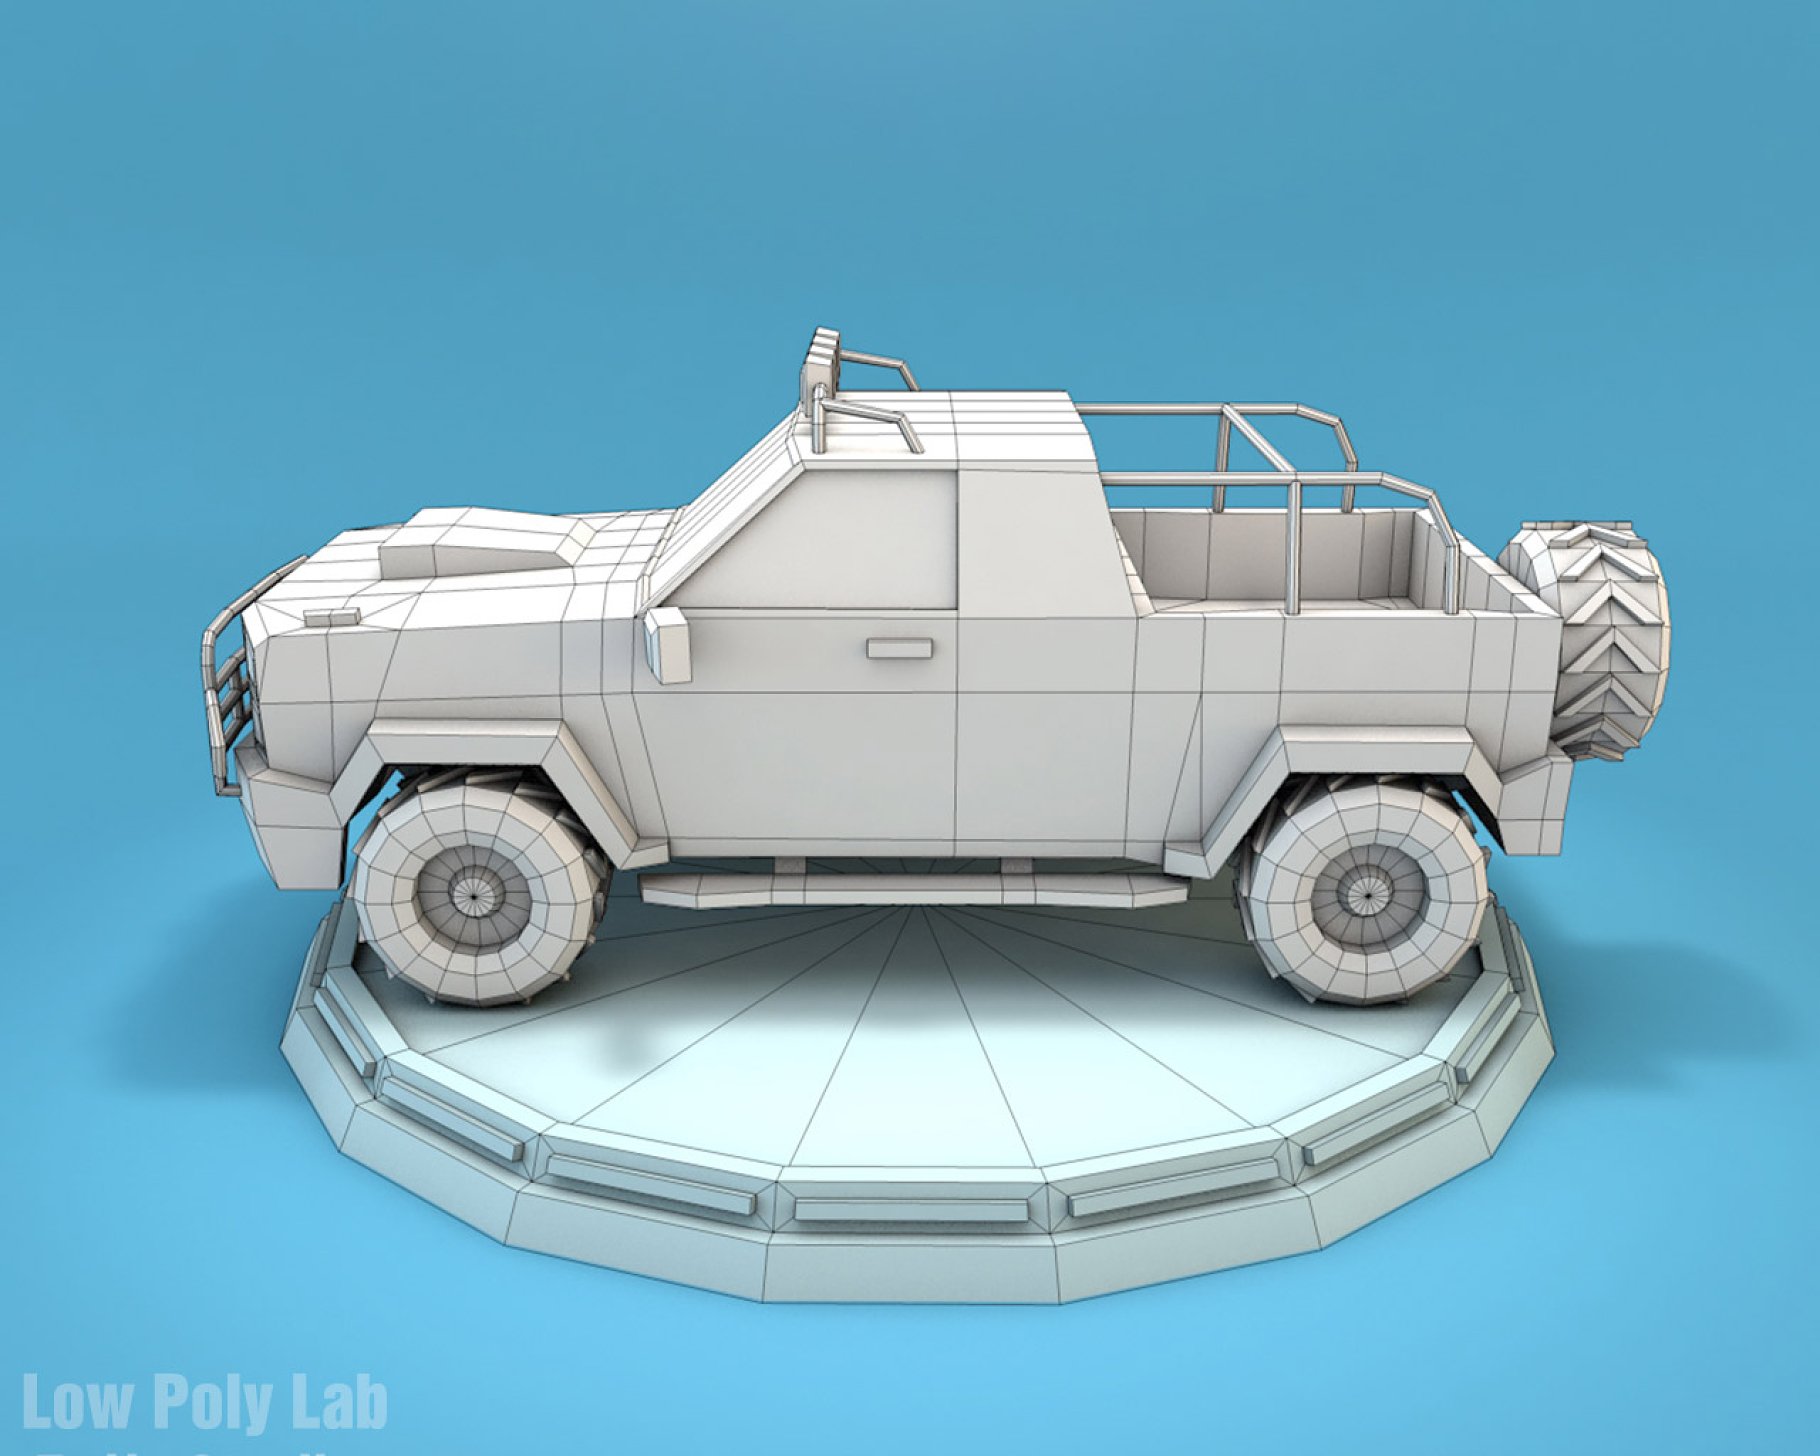 Low poly jeep graphic mockup in the side.